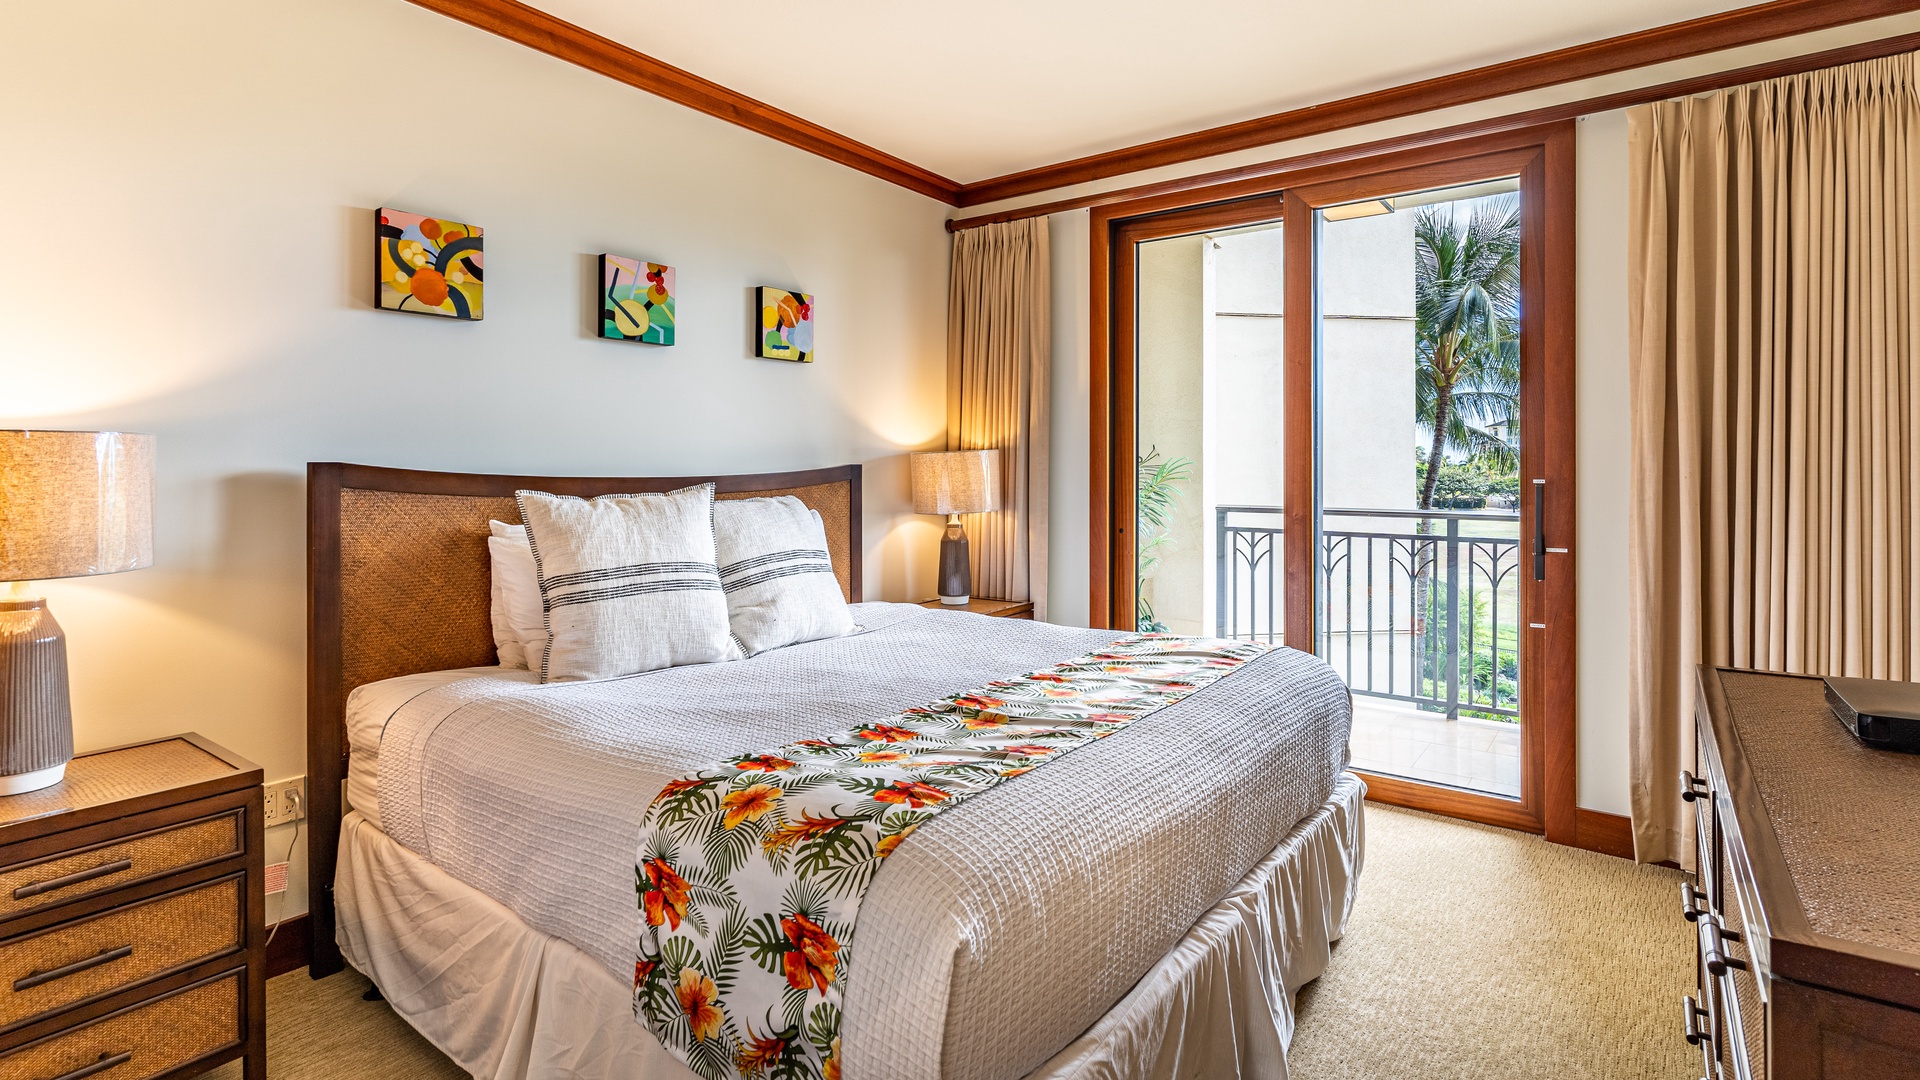 Kapolei Vacation Rentals, Ko Olina Beach Villas B403 - The primary guest bedroom with access to the lanai.